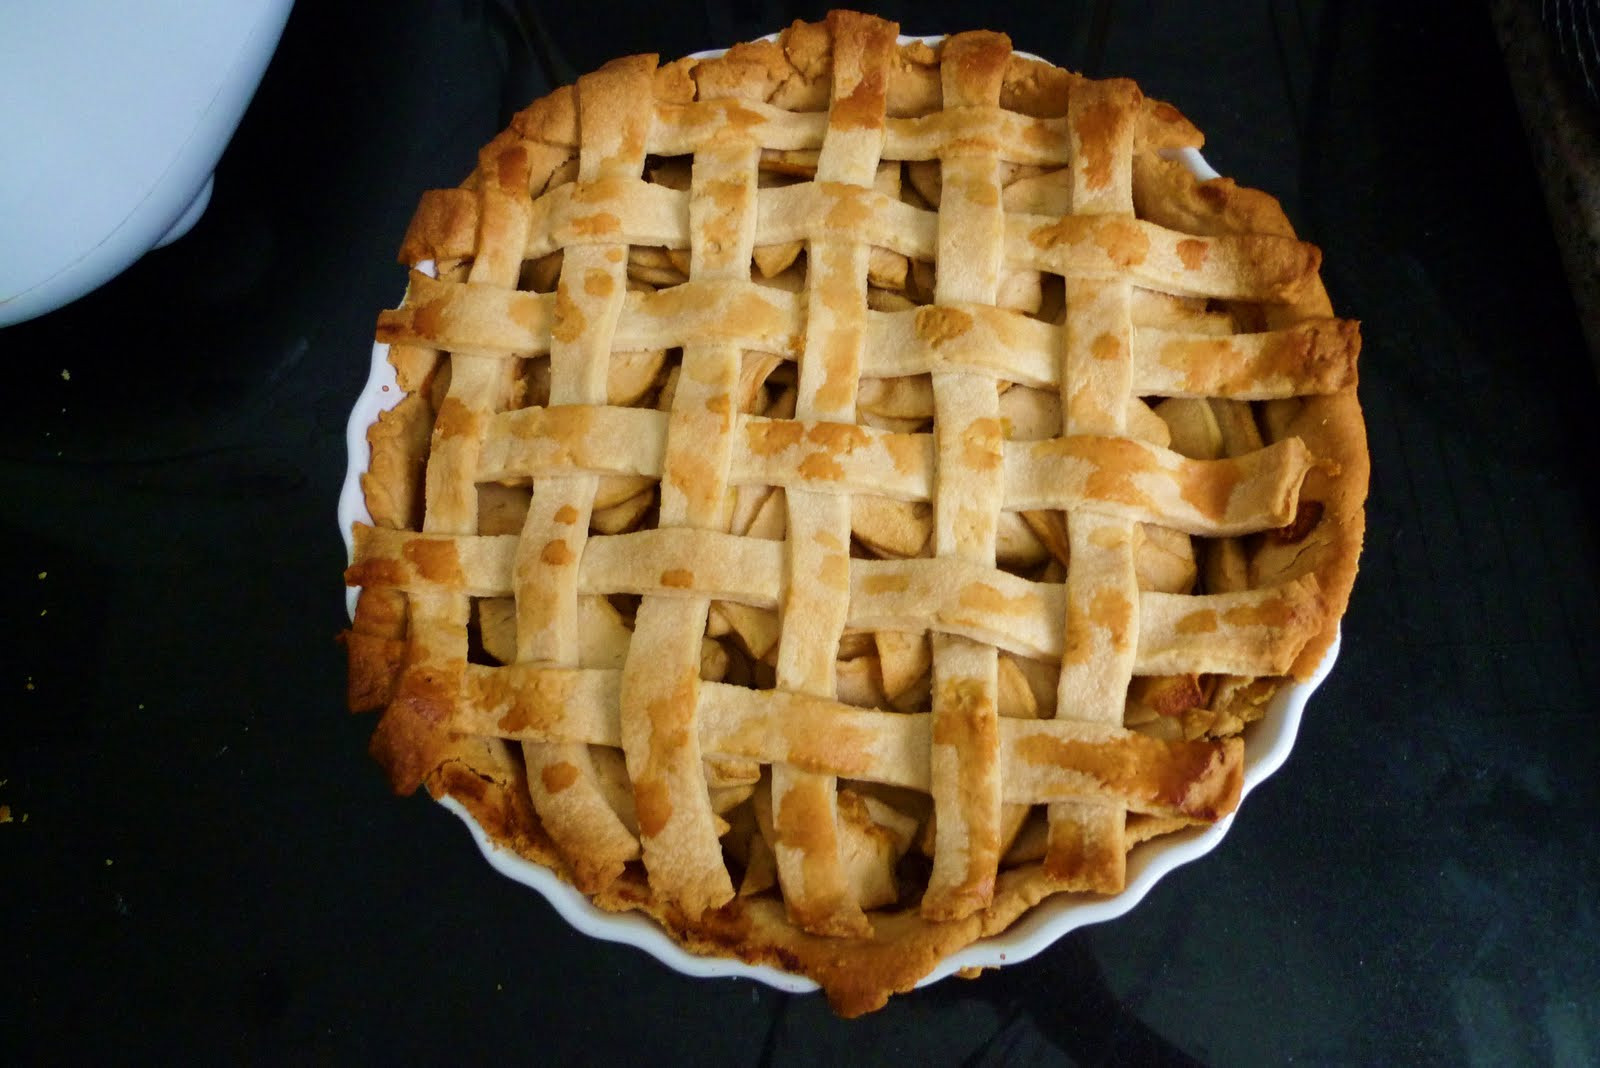 Lattice Top Apple Pie
 chicklet can cook American pie for the American birthday boy